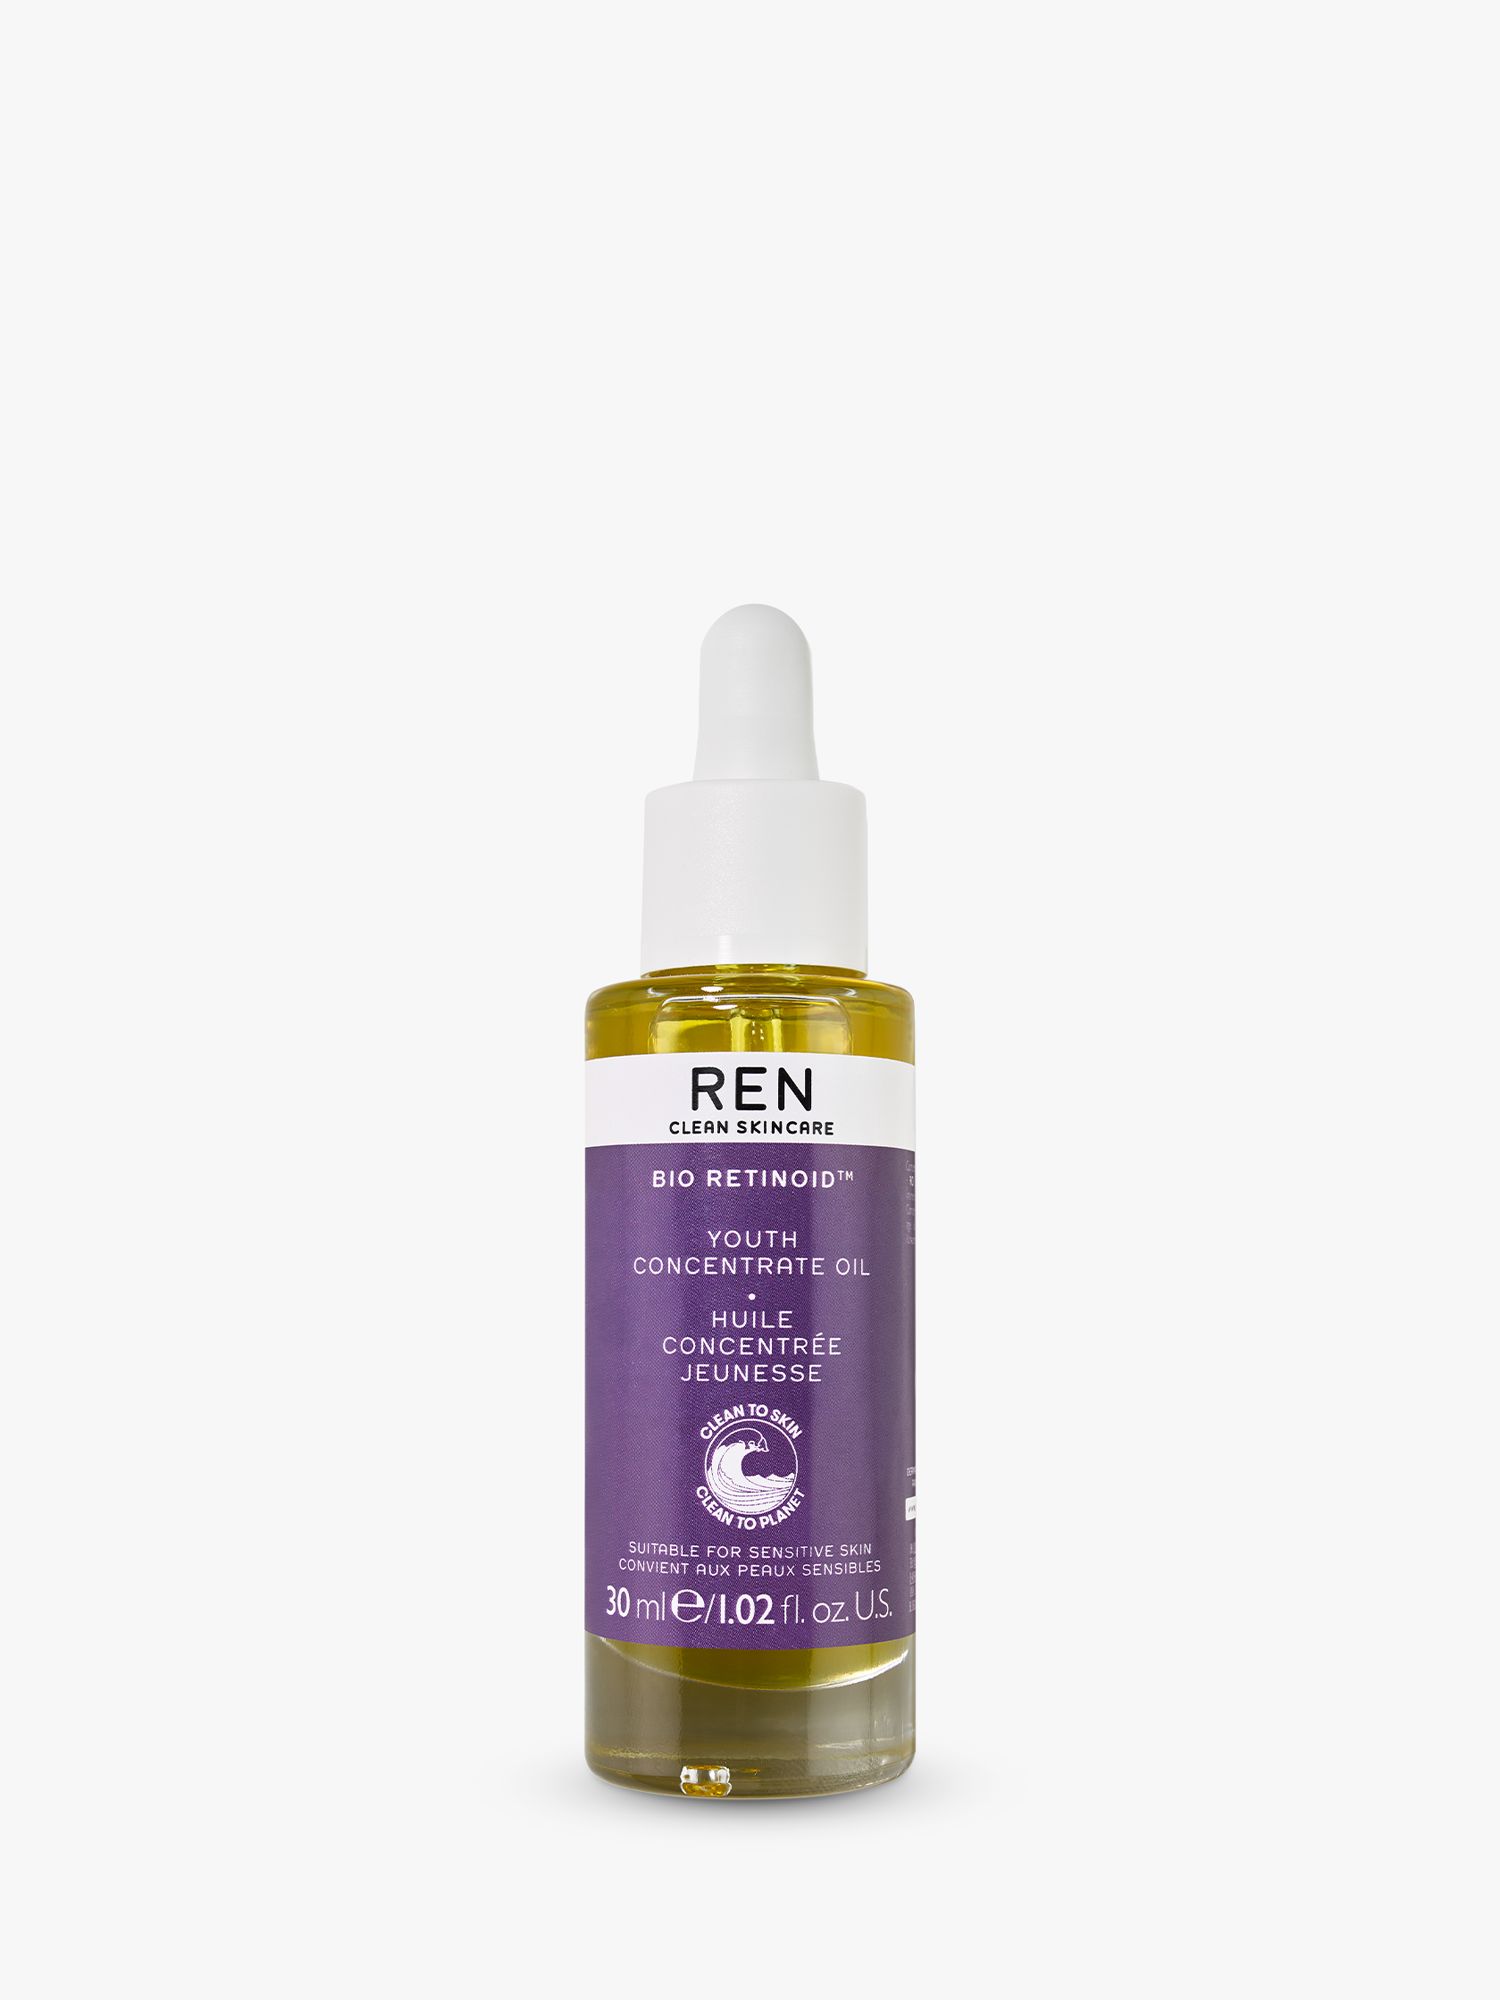 REN Clean Skincare Bio Retinoid™ Youth Concentrate Oil, 30ml 1